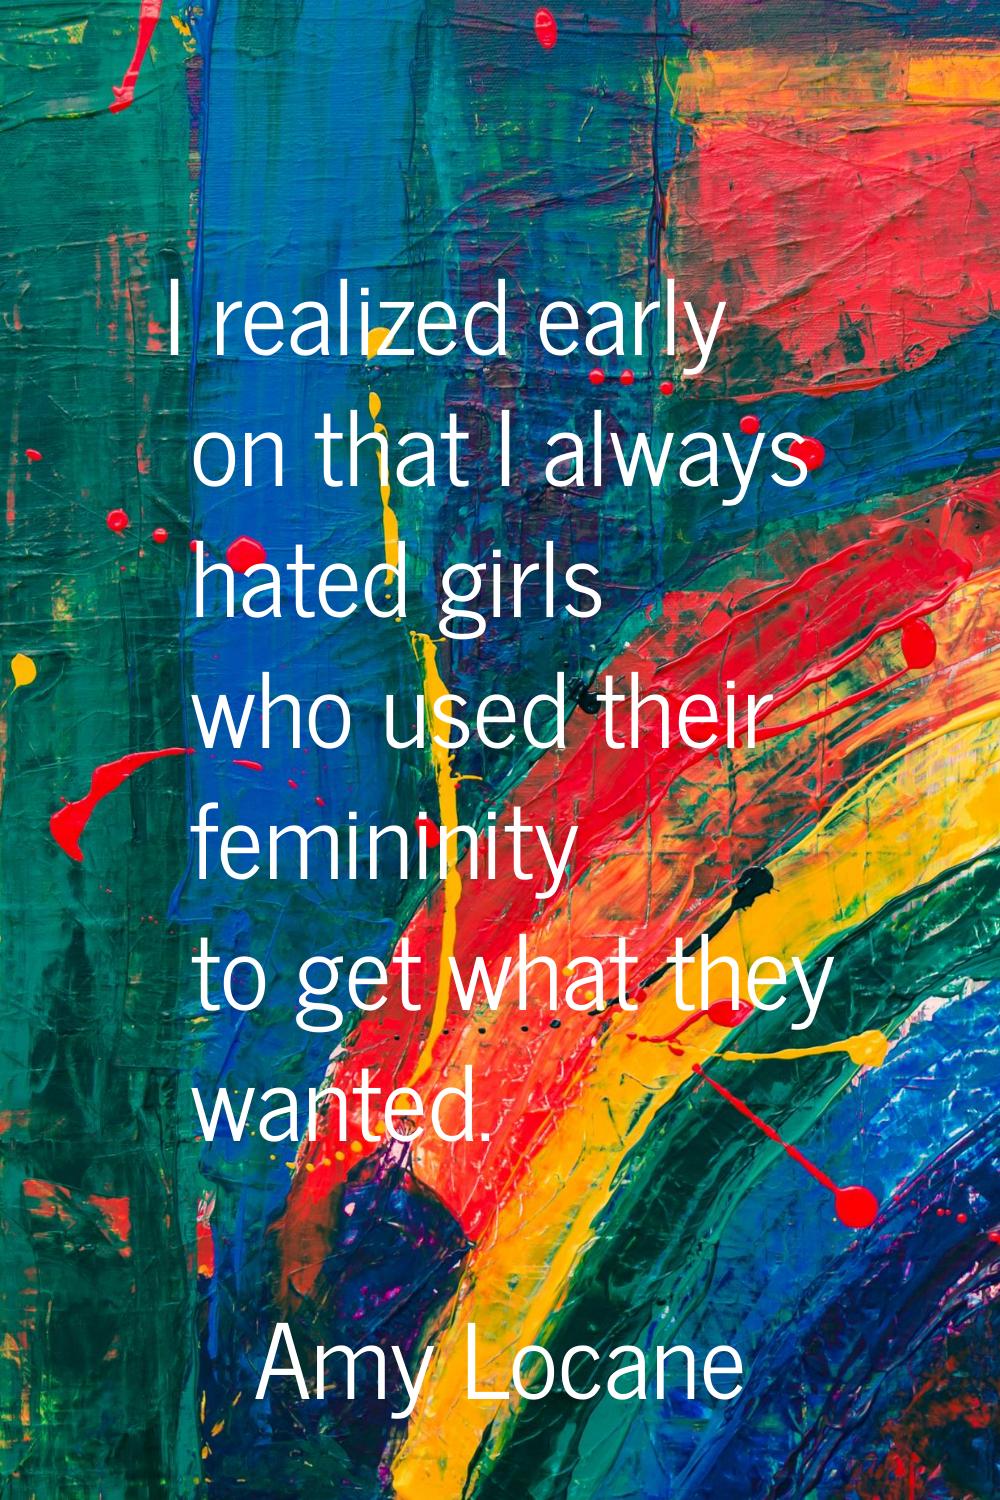 I realized early on that I always hated girls who used their femininity to get what they wanted.